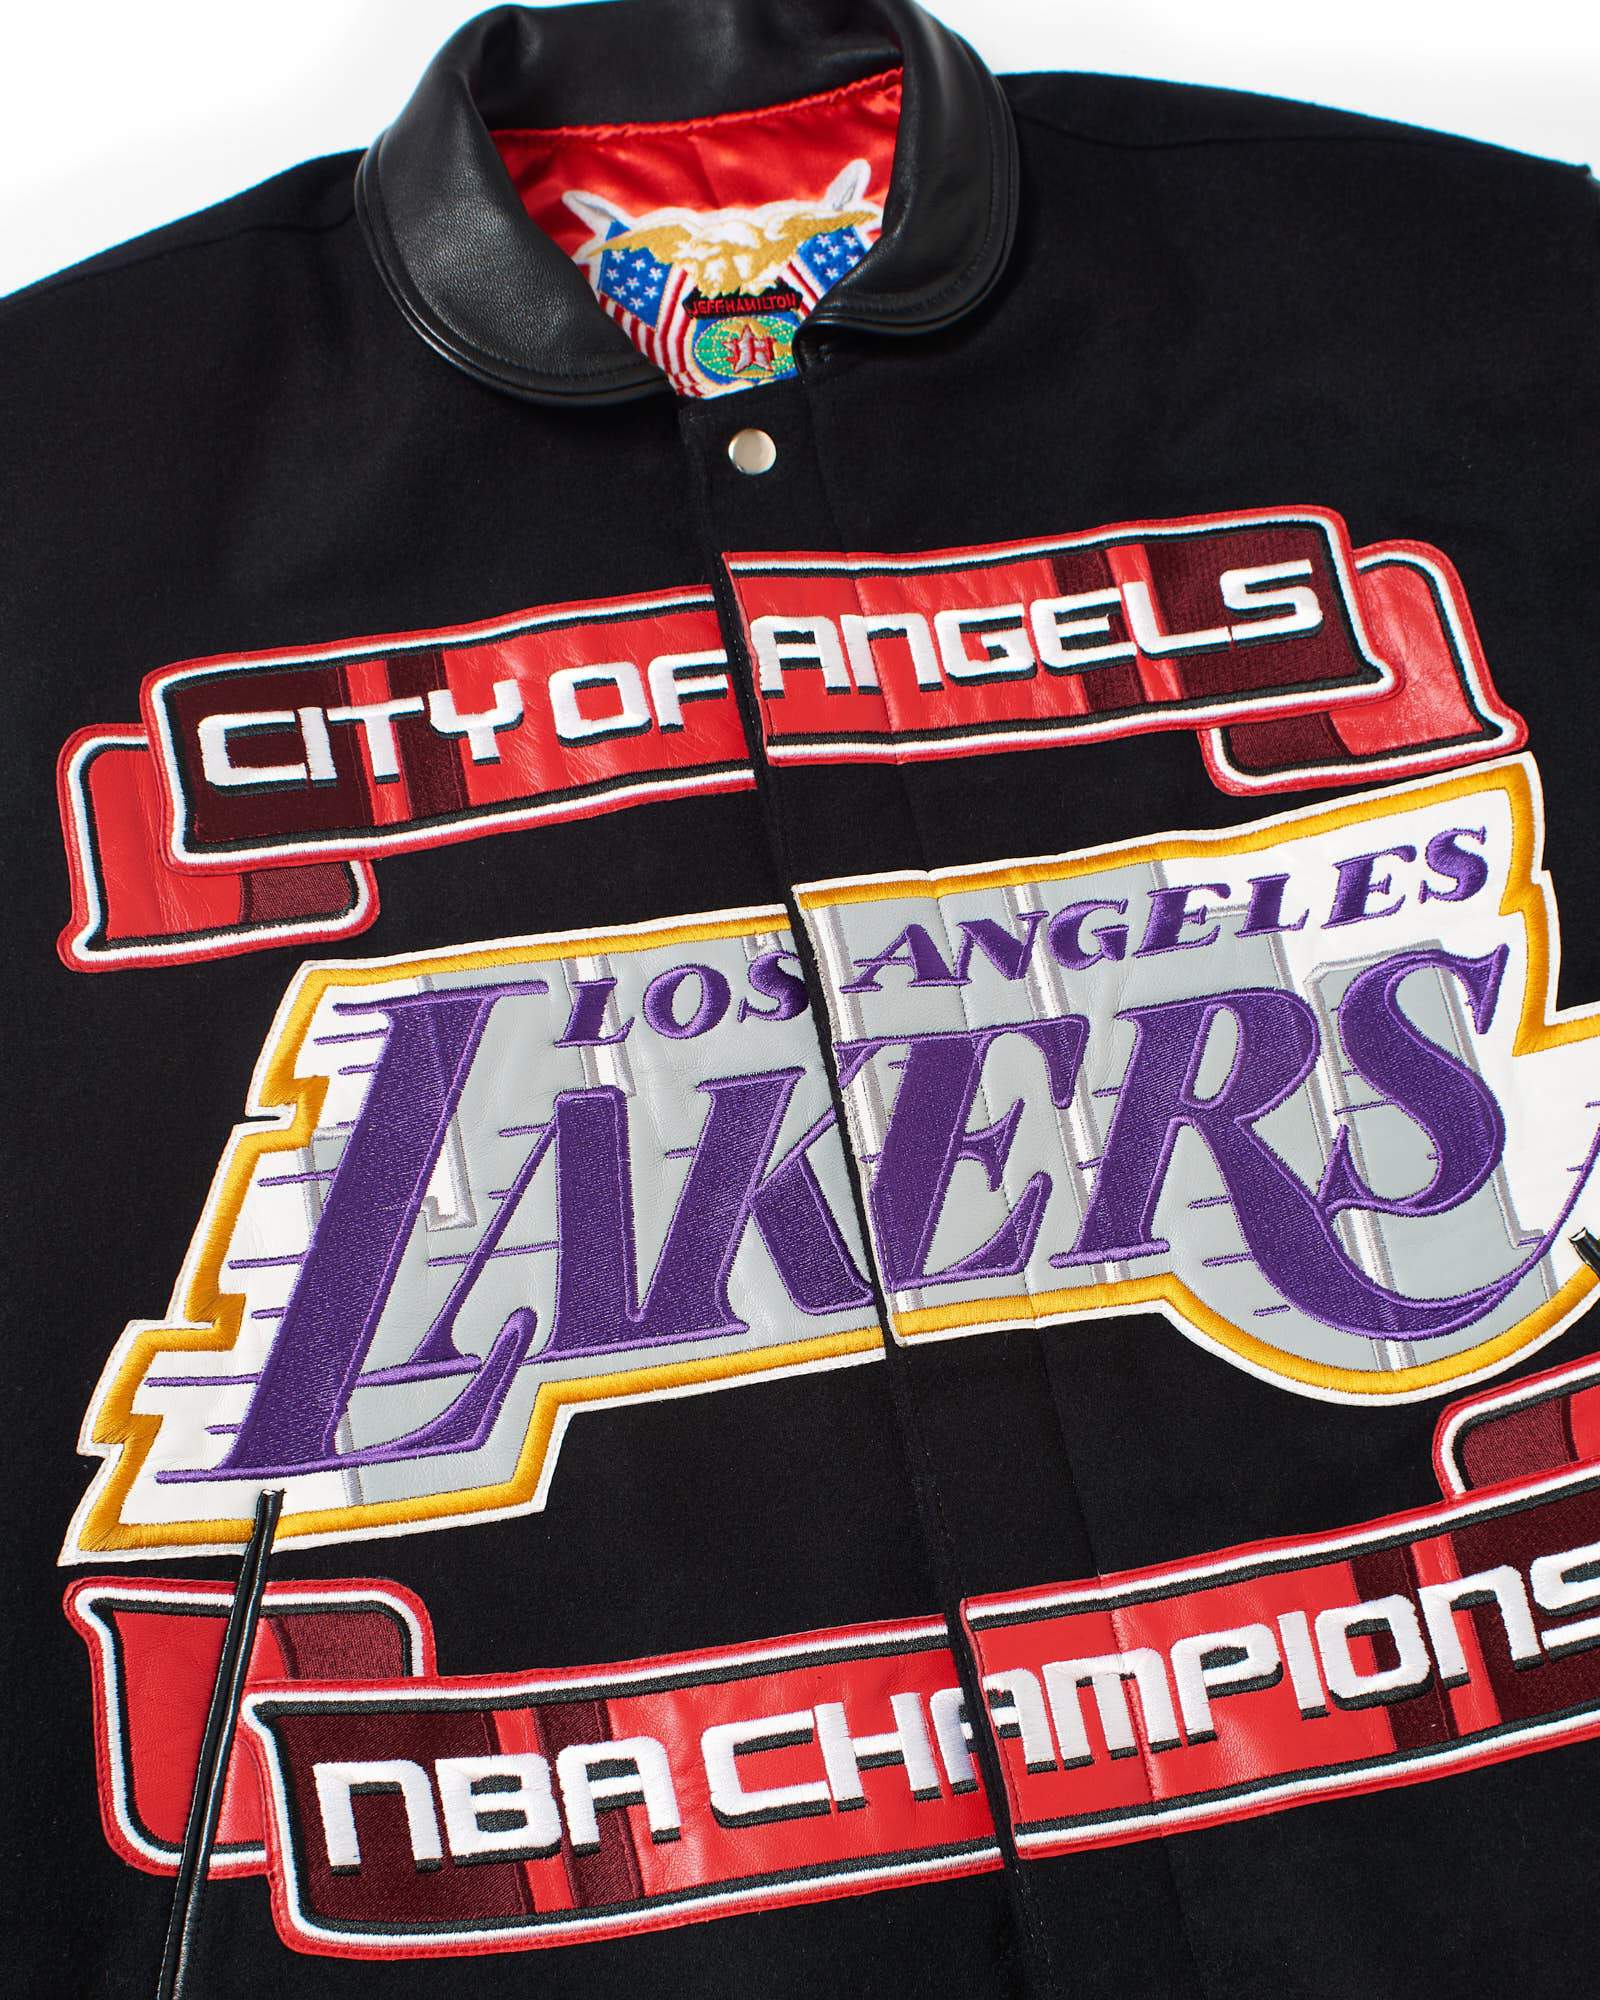 Lakers Limited Edition 9 Time NBA Championships Letterman Jacket